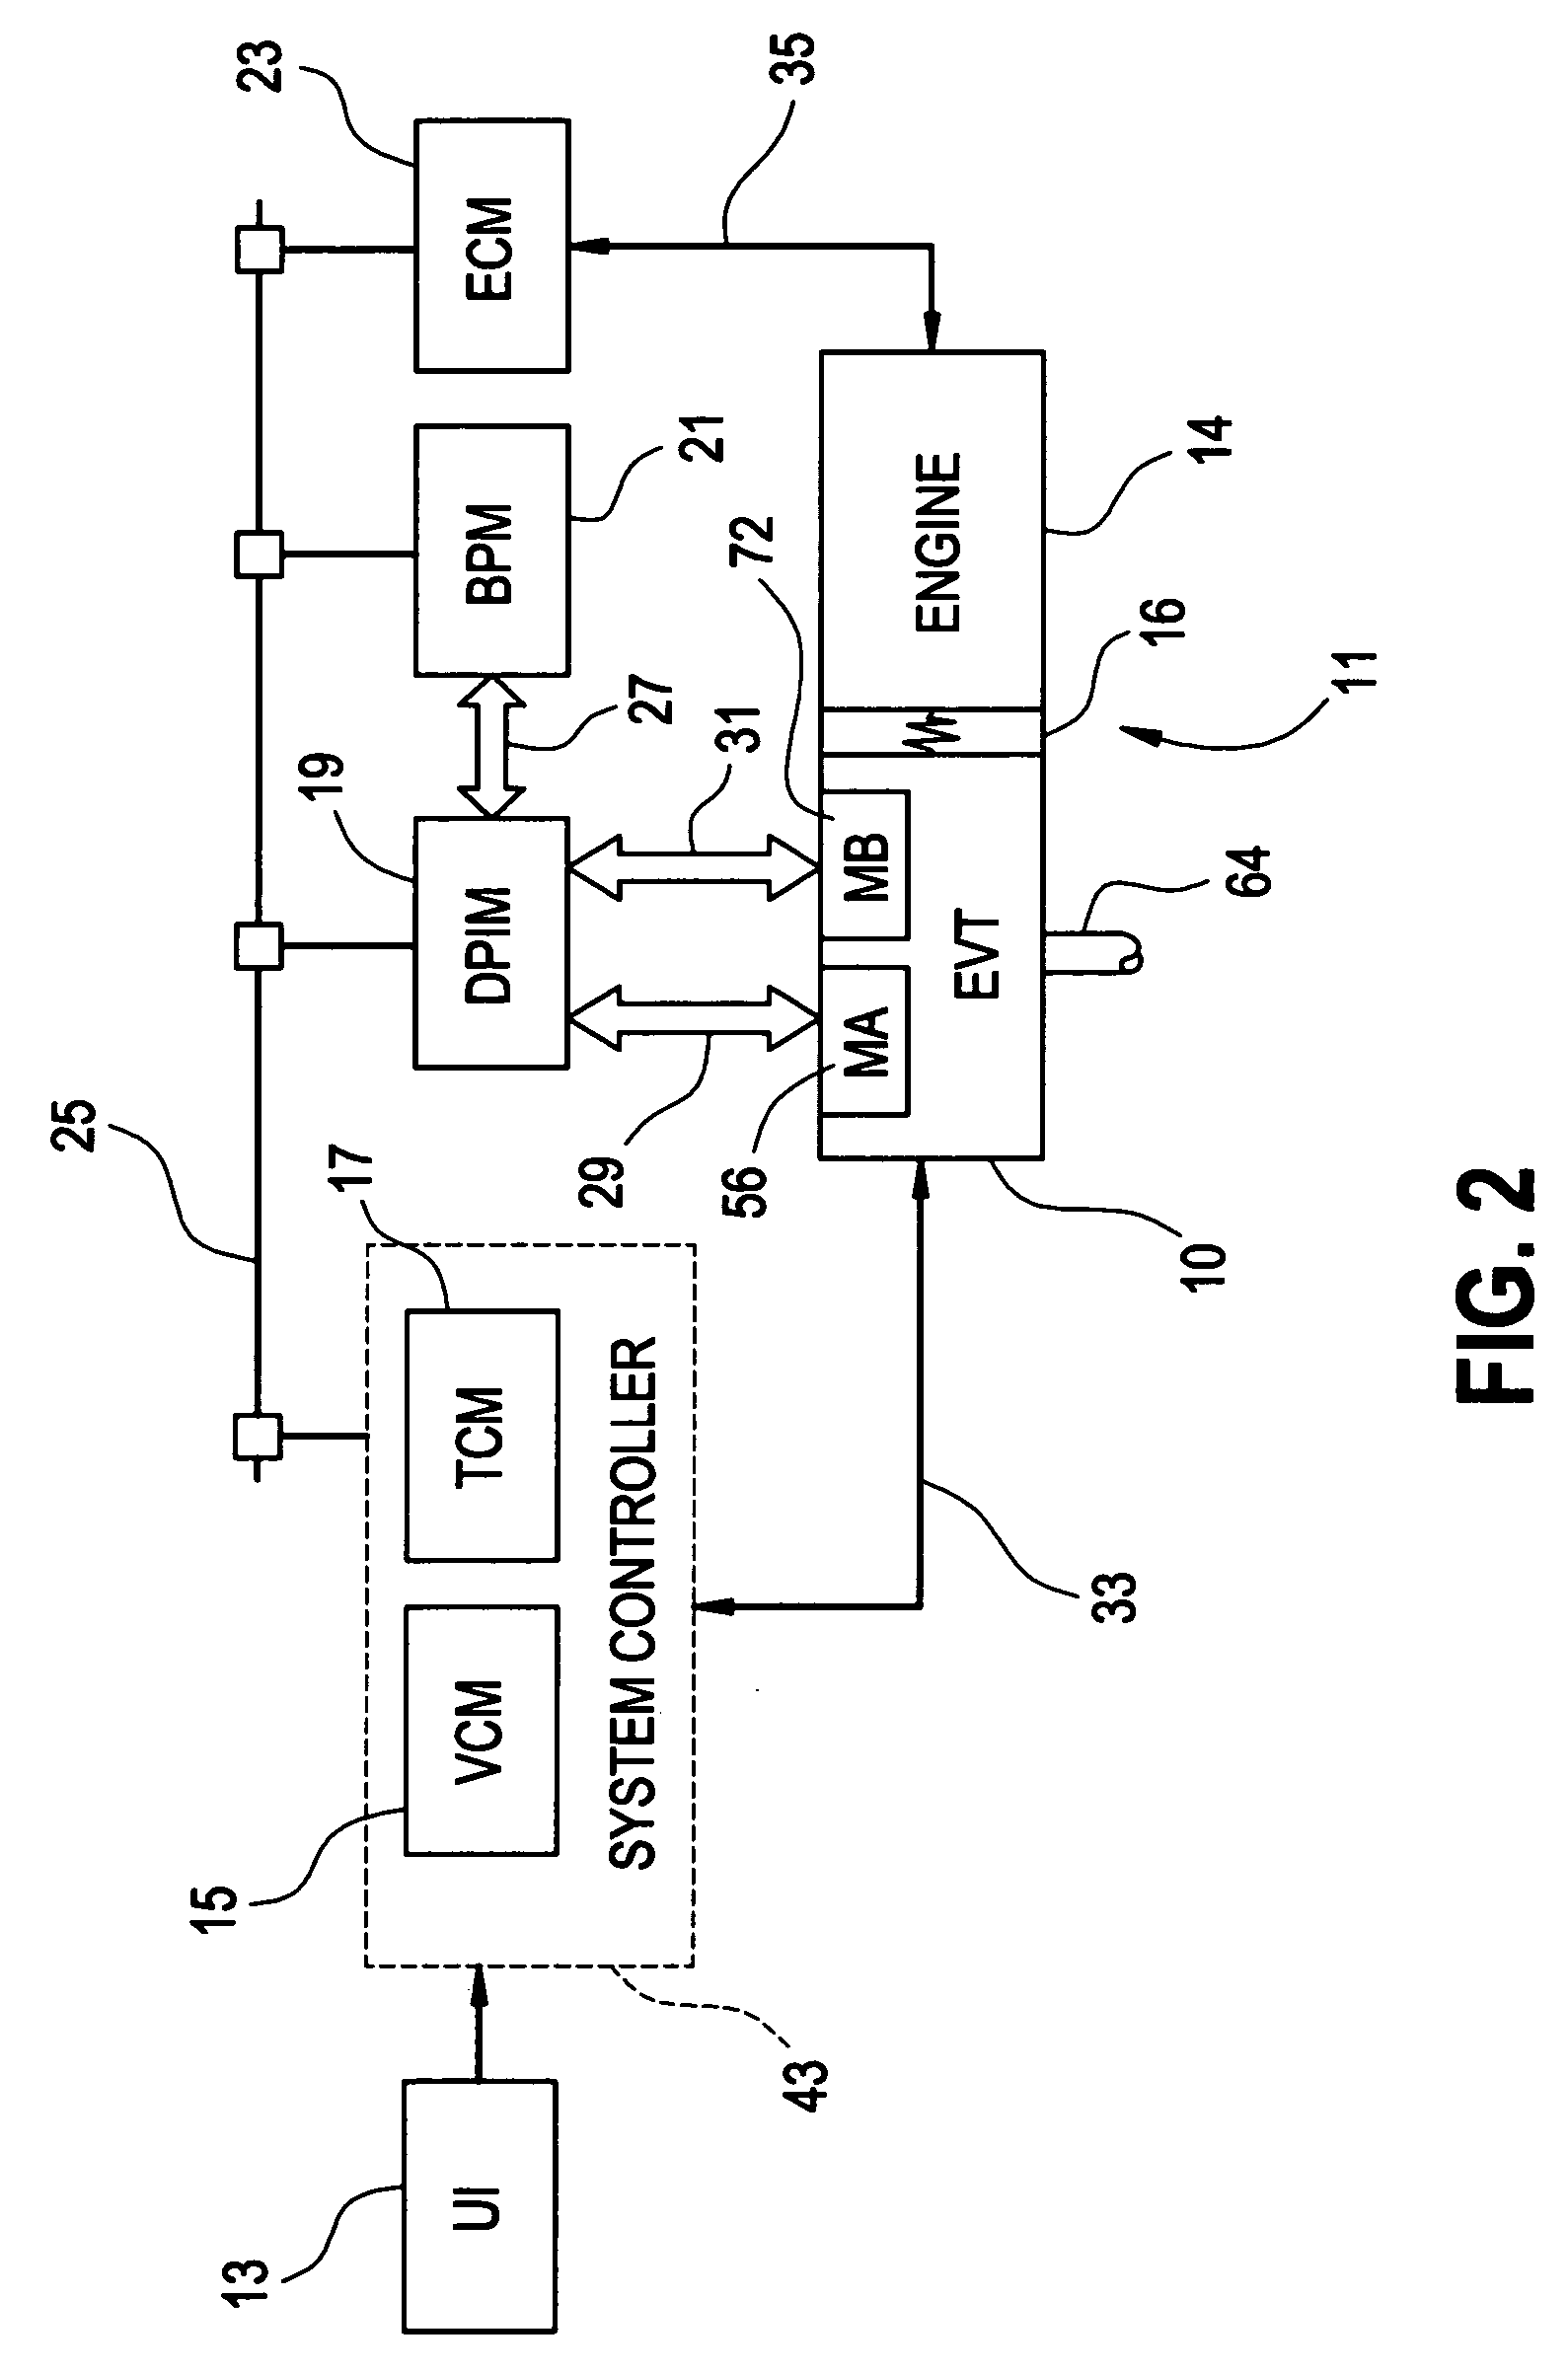 Method of providing electric motor torque reserve in a hybrid electric vehicle